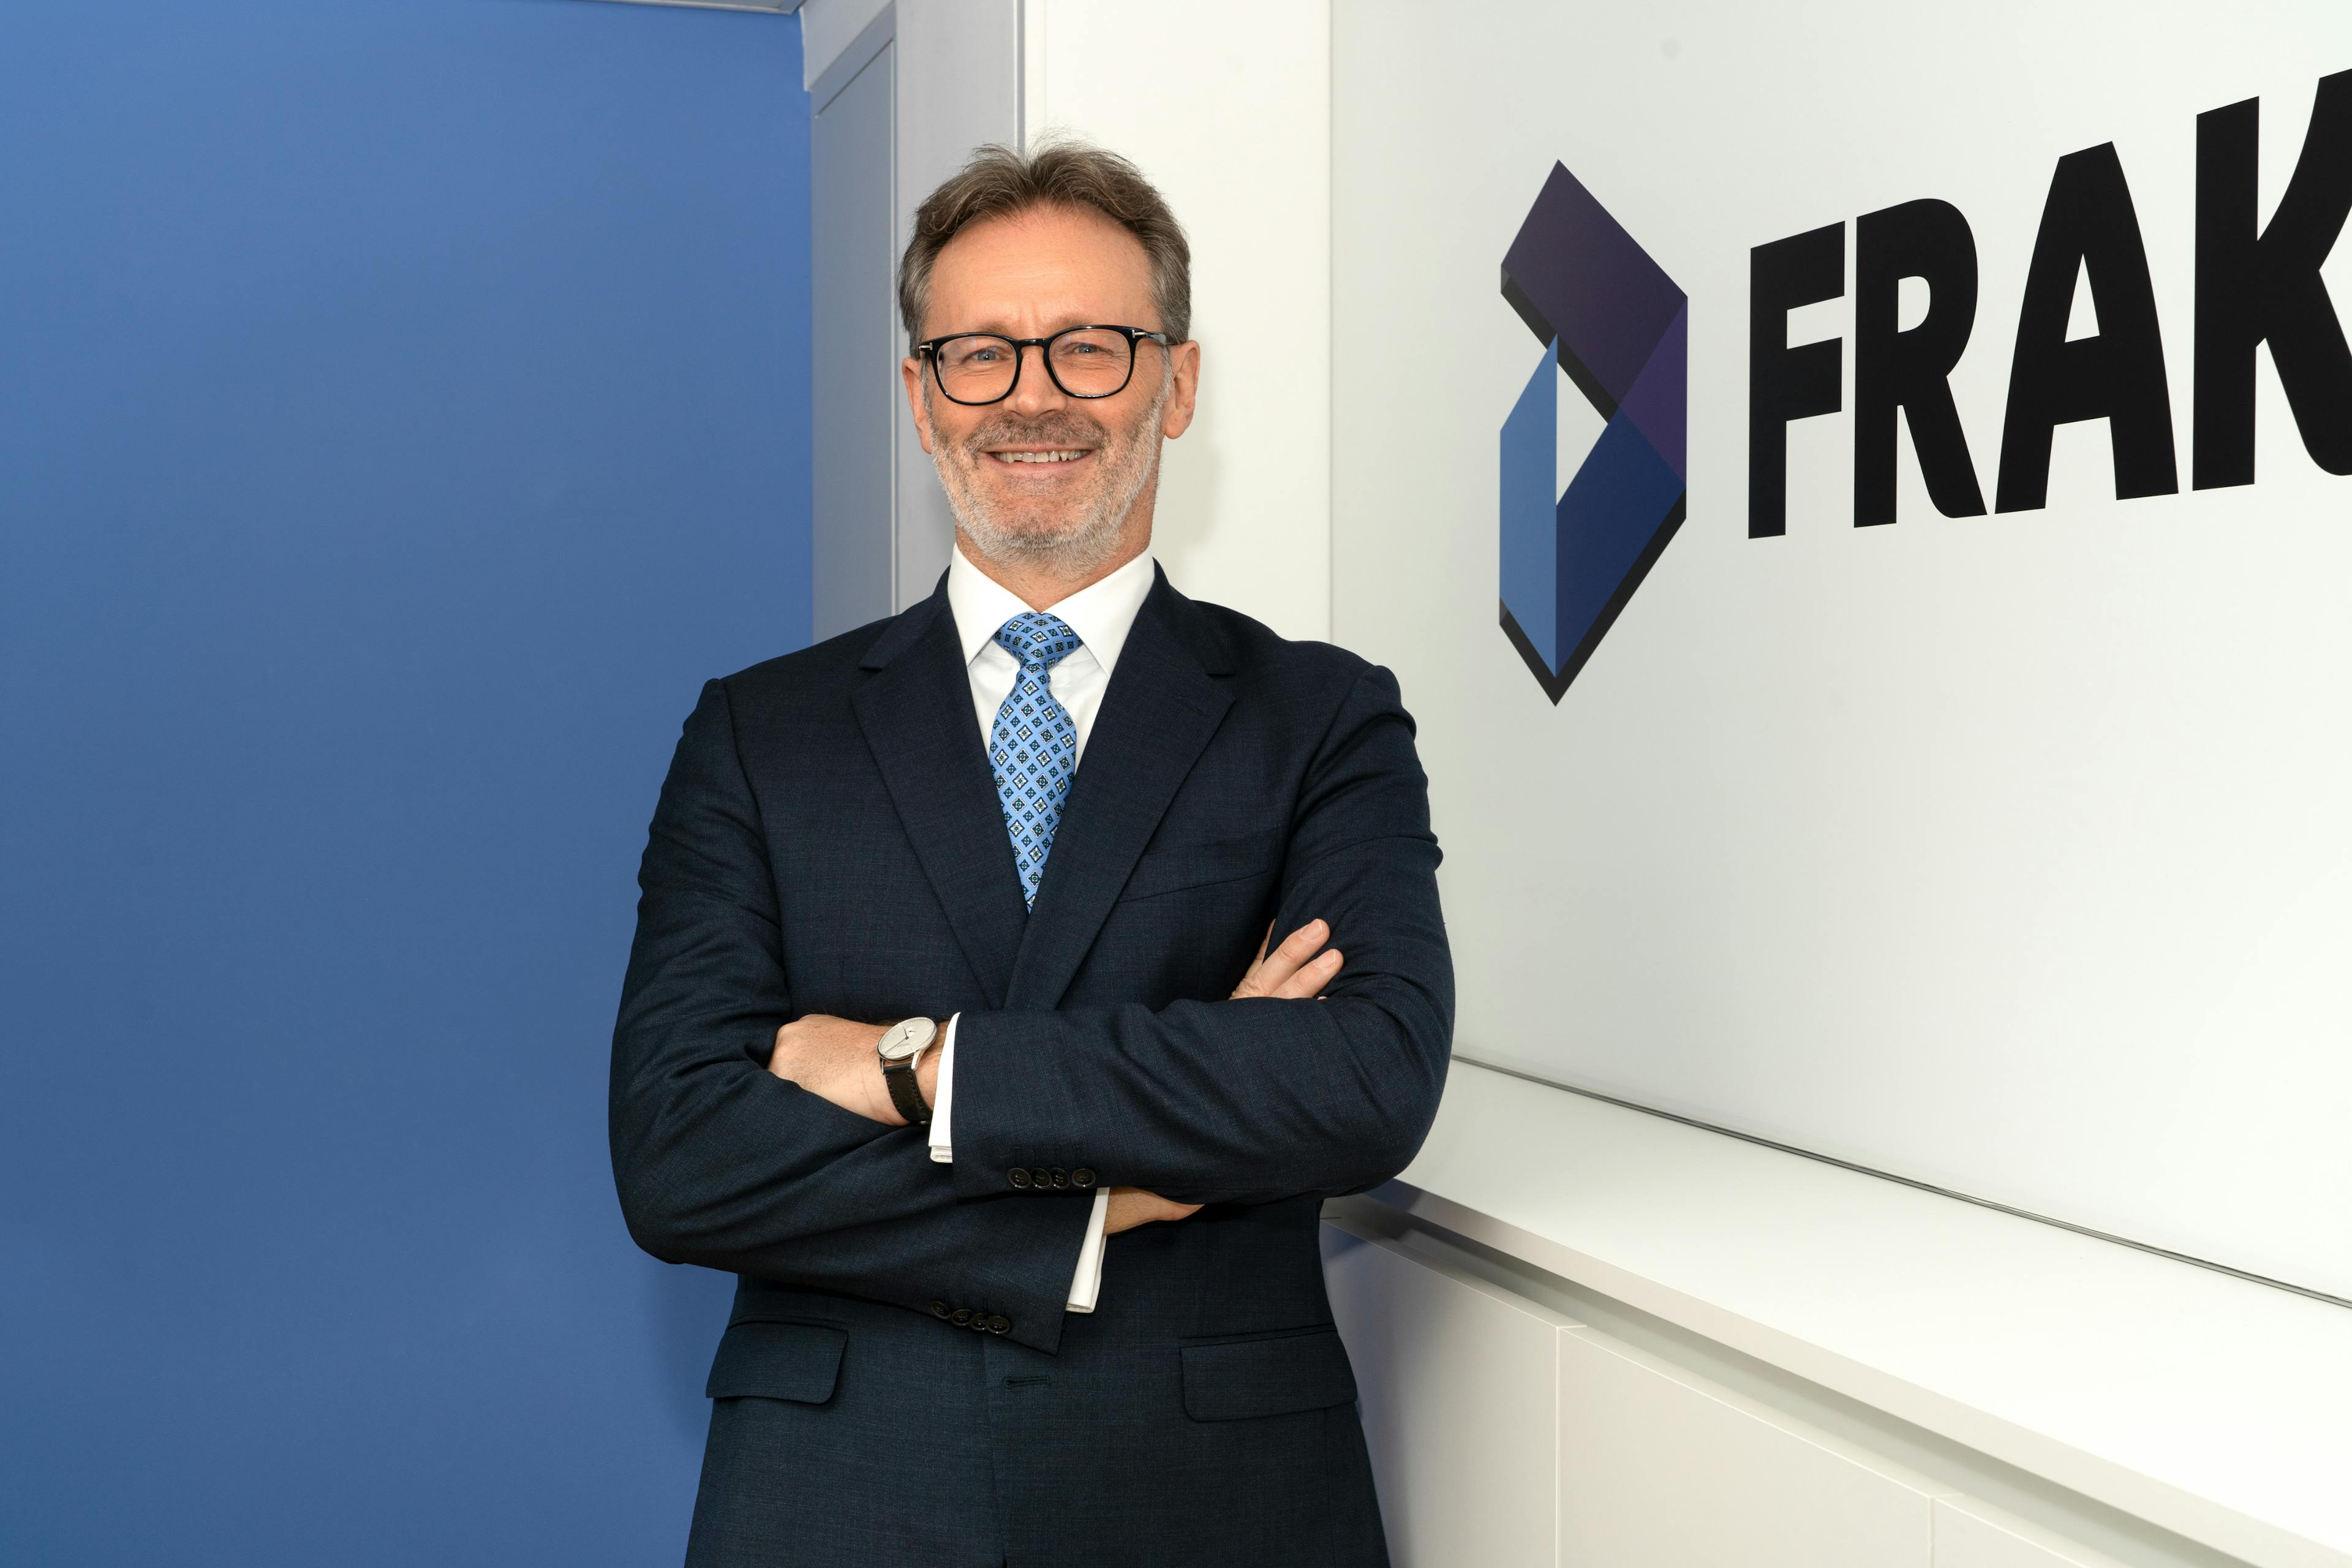 Portrait of Anthony Pink, a partner at Fraktal Development, poised confidently with arms folded in front of a panel displaying the 'FRAKTAL' logo. He is dressed in a professional navy blue suit, patterned blue tie, and glasses, offering a friendly smile in a well-lit office setting that reflects the company's branding colors.